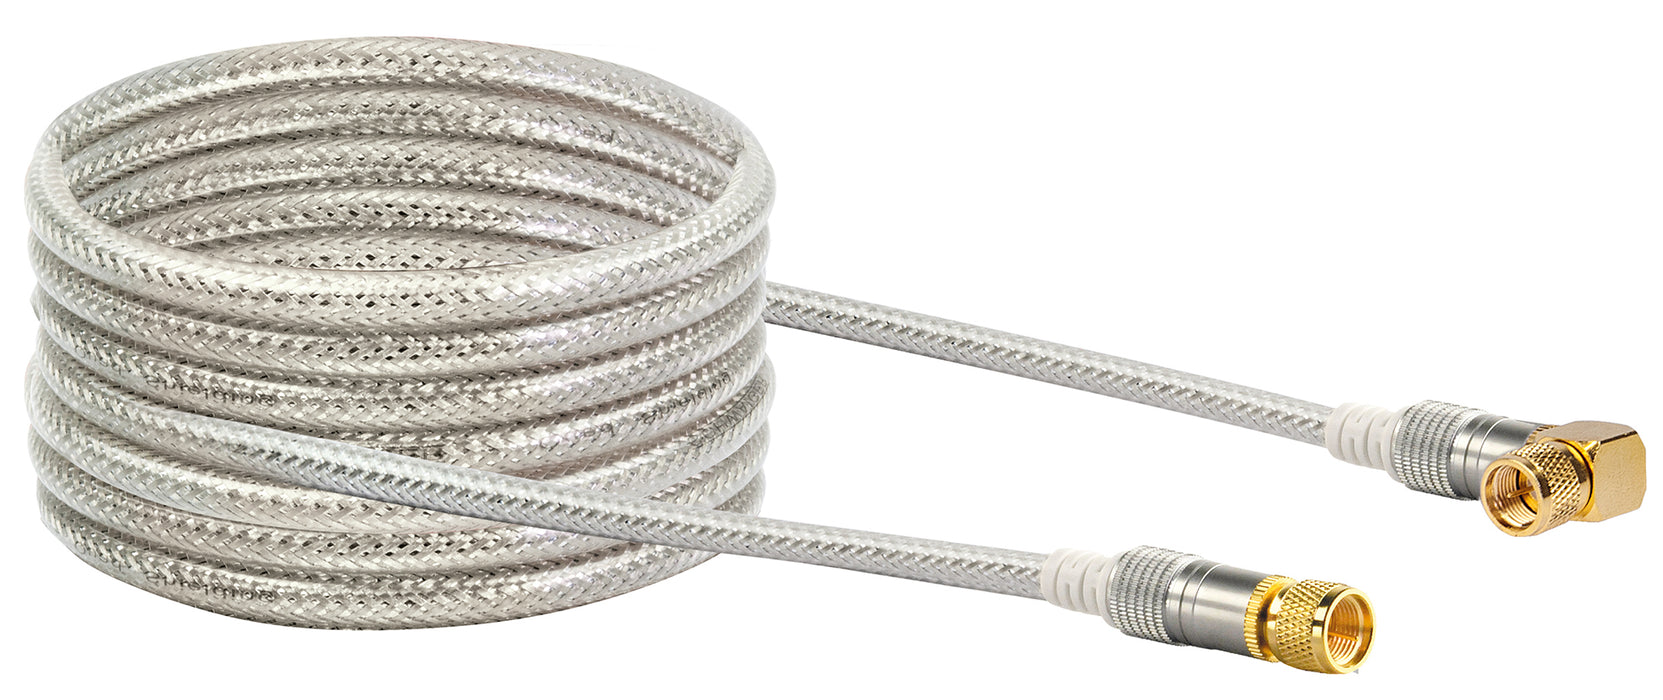 SAT connection cable (110 dB)